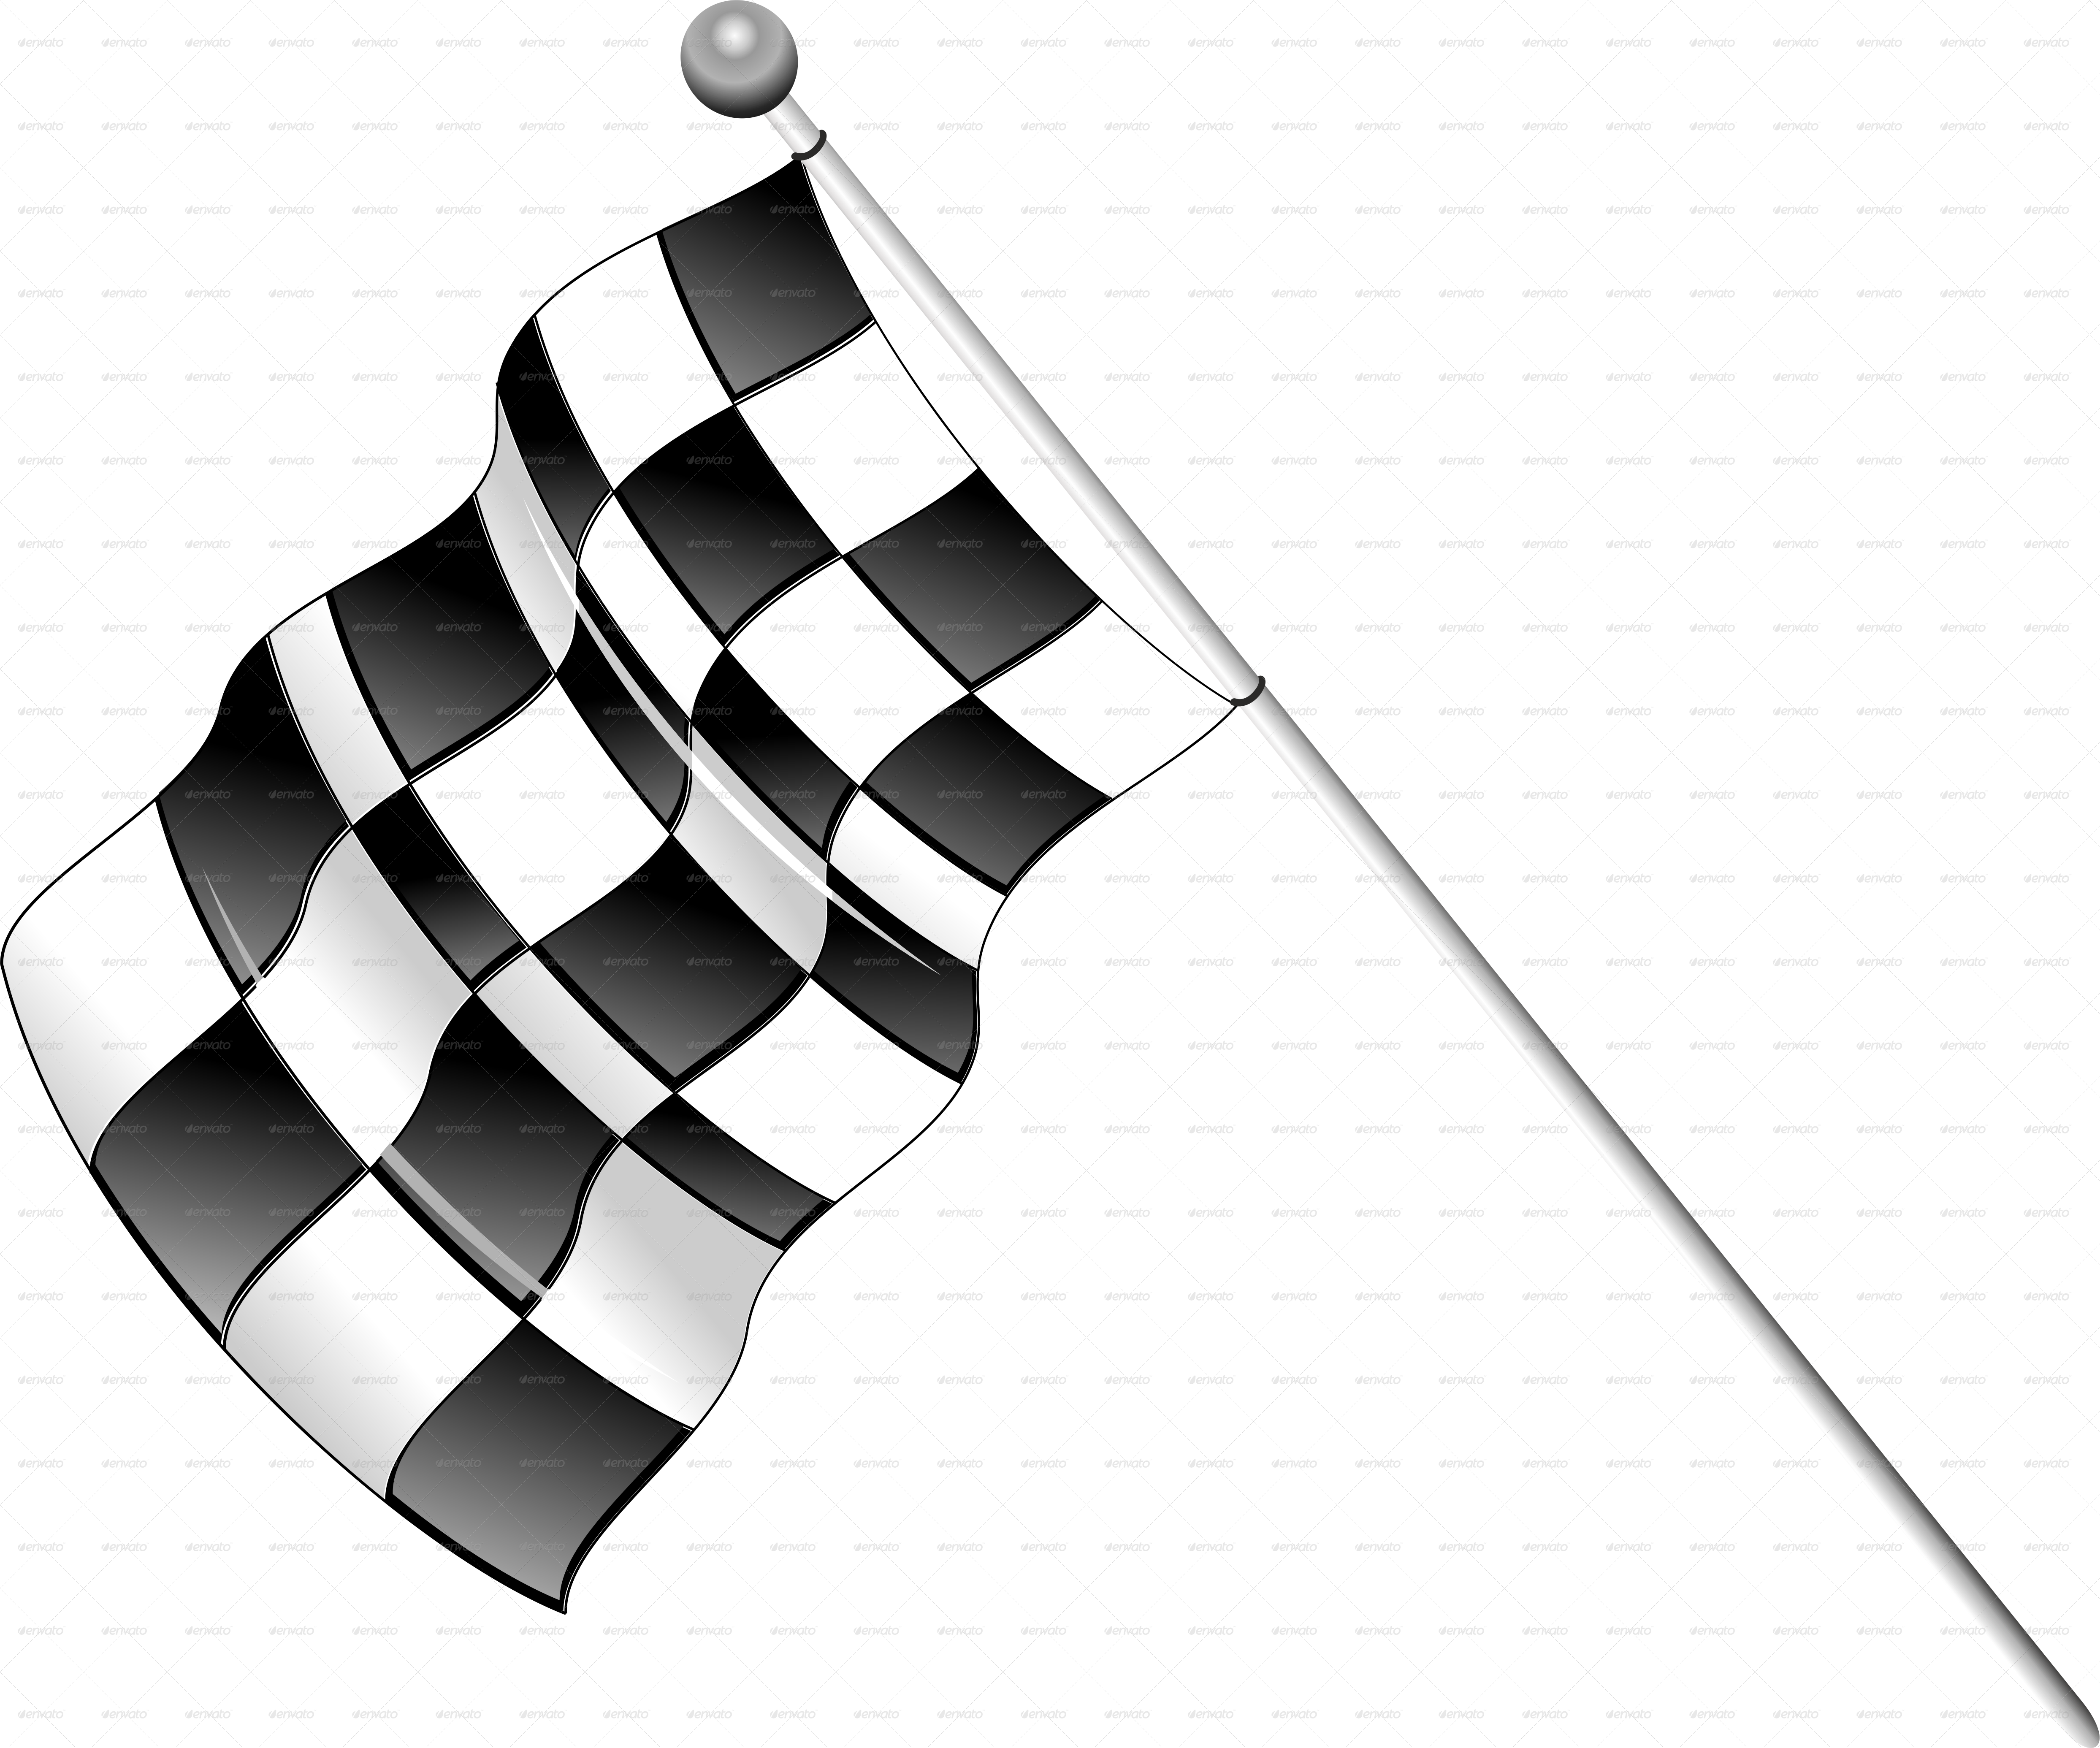 A Black And White Checkered Flag